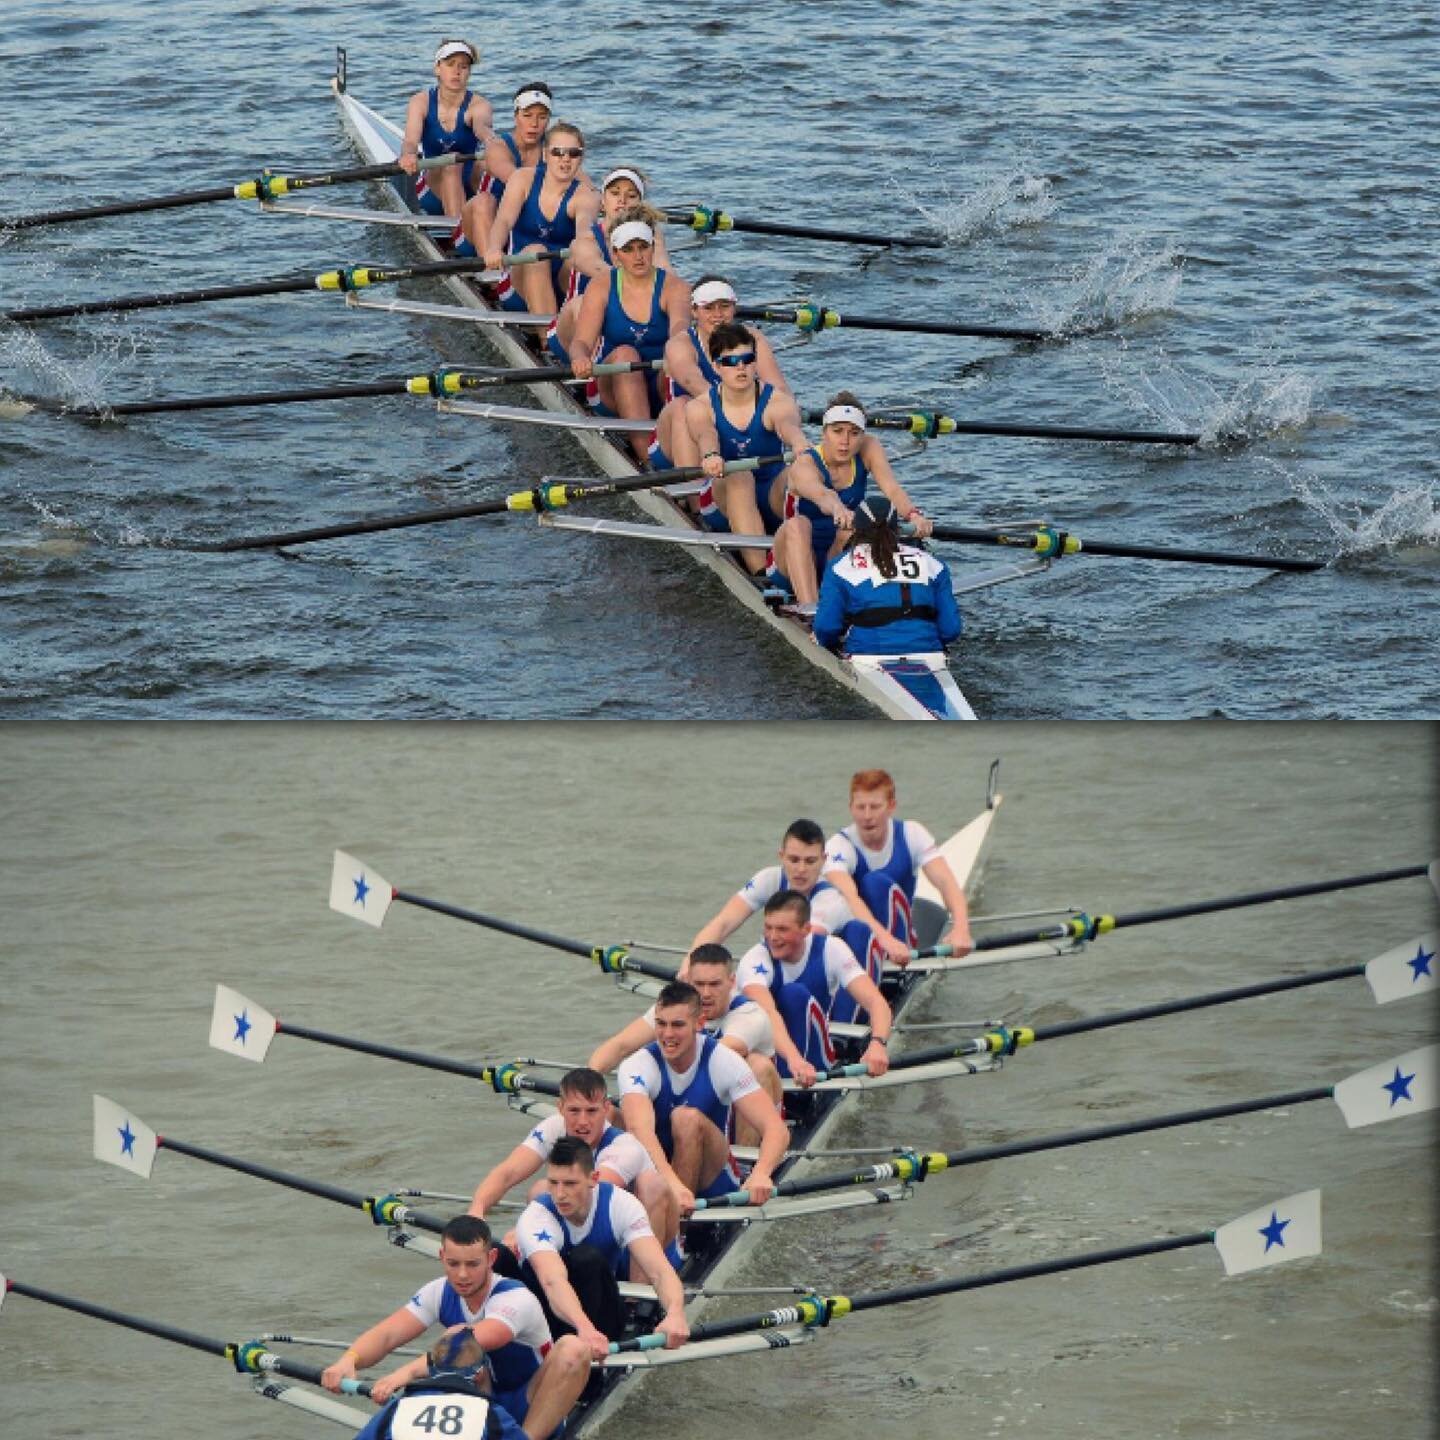 Miss racing the head? The Blue star club is looking to enter crews for vets head on the 22nd of March. If you&rsquo;re keen get in touch with men&rsquo;s captain @nathanorowing or women&rsquo;s captain @barrym24. 
Photos of some of the top finishing 